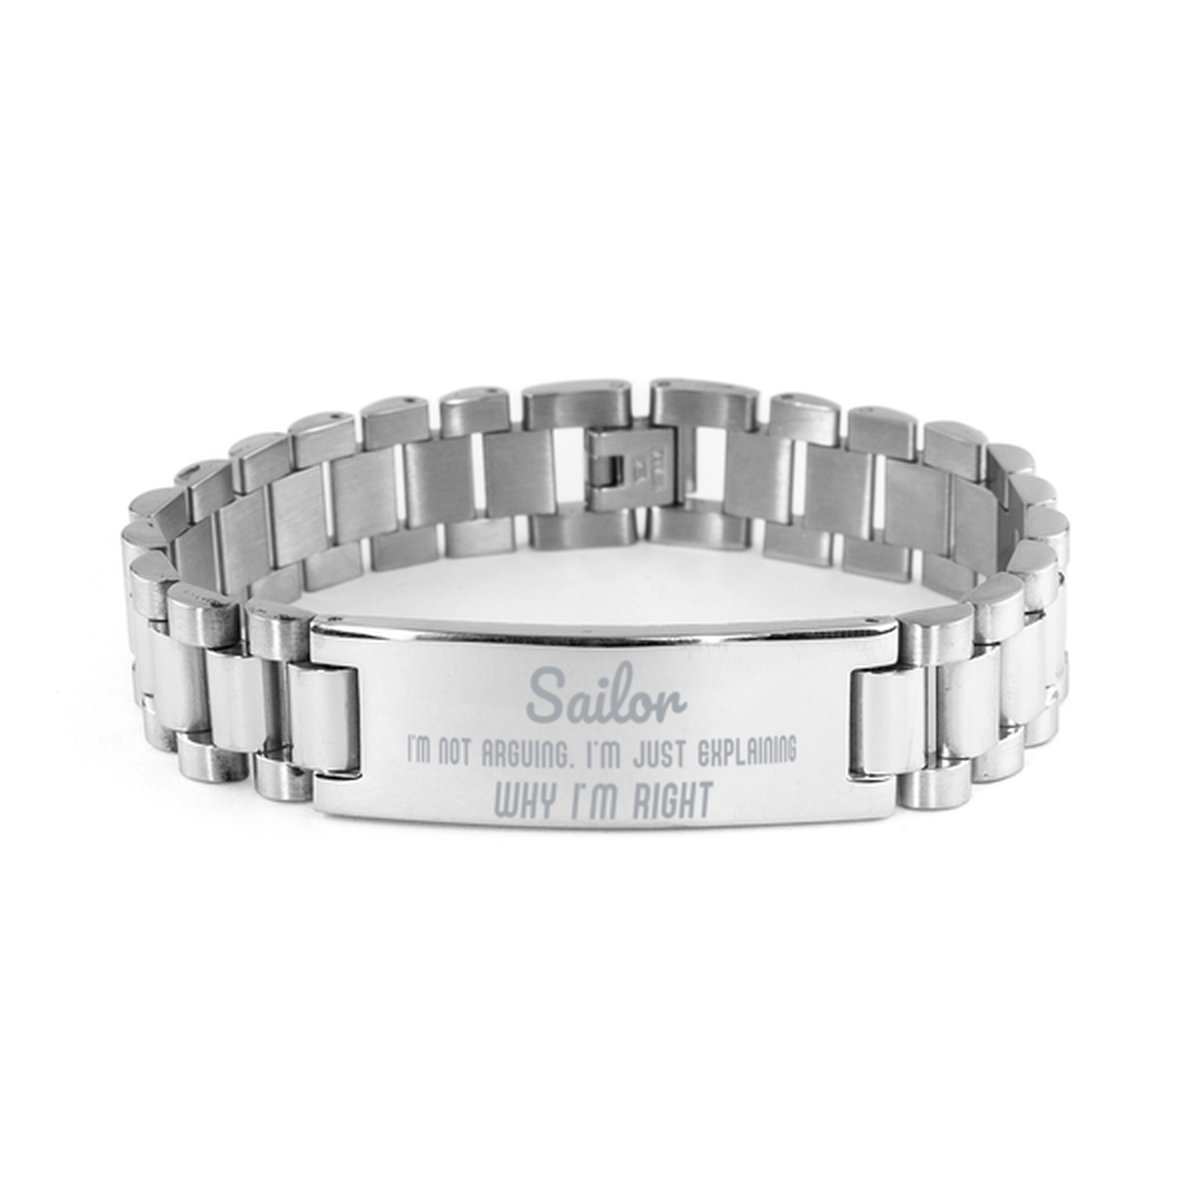 Sailor I'm not Arguing. I'm Just Explaining Why I'm RIGHT Ladder Stainless Steel Bracelet, Graduation Birthday Christmas Sailor Gifts For Sailor Funny Saying Quote Present for Men Women Coworker